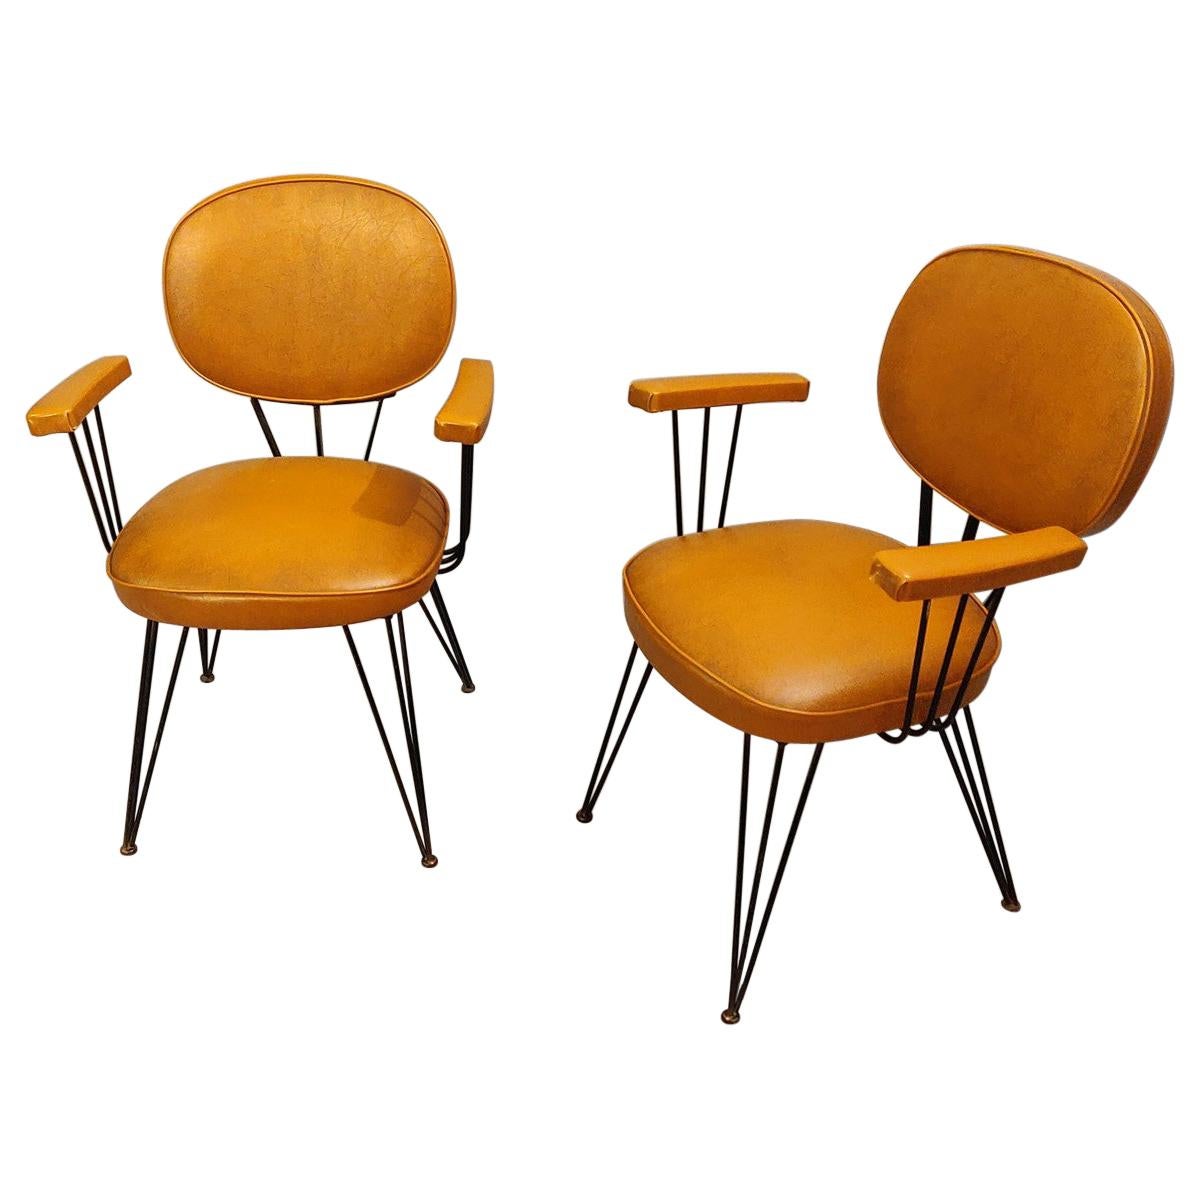 Black Lacquered Metal Structure Armchairs, Italy, 1950s For Sale